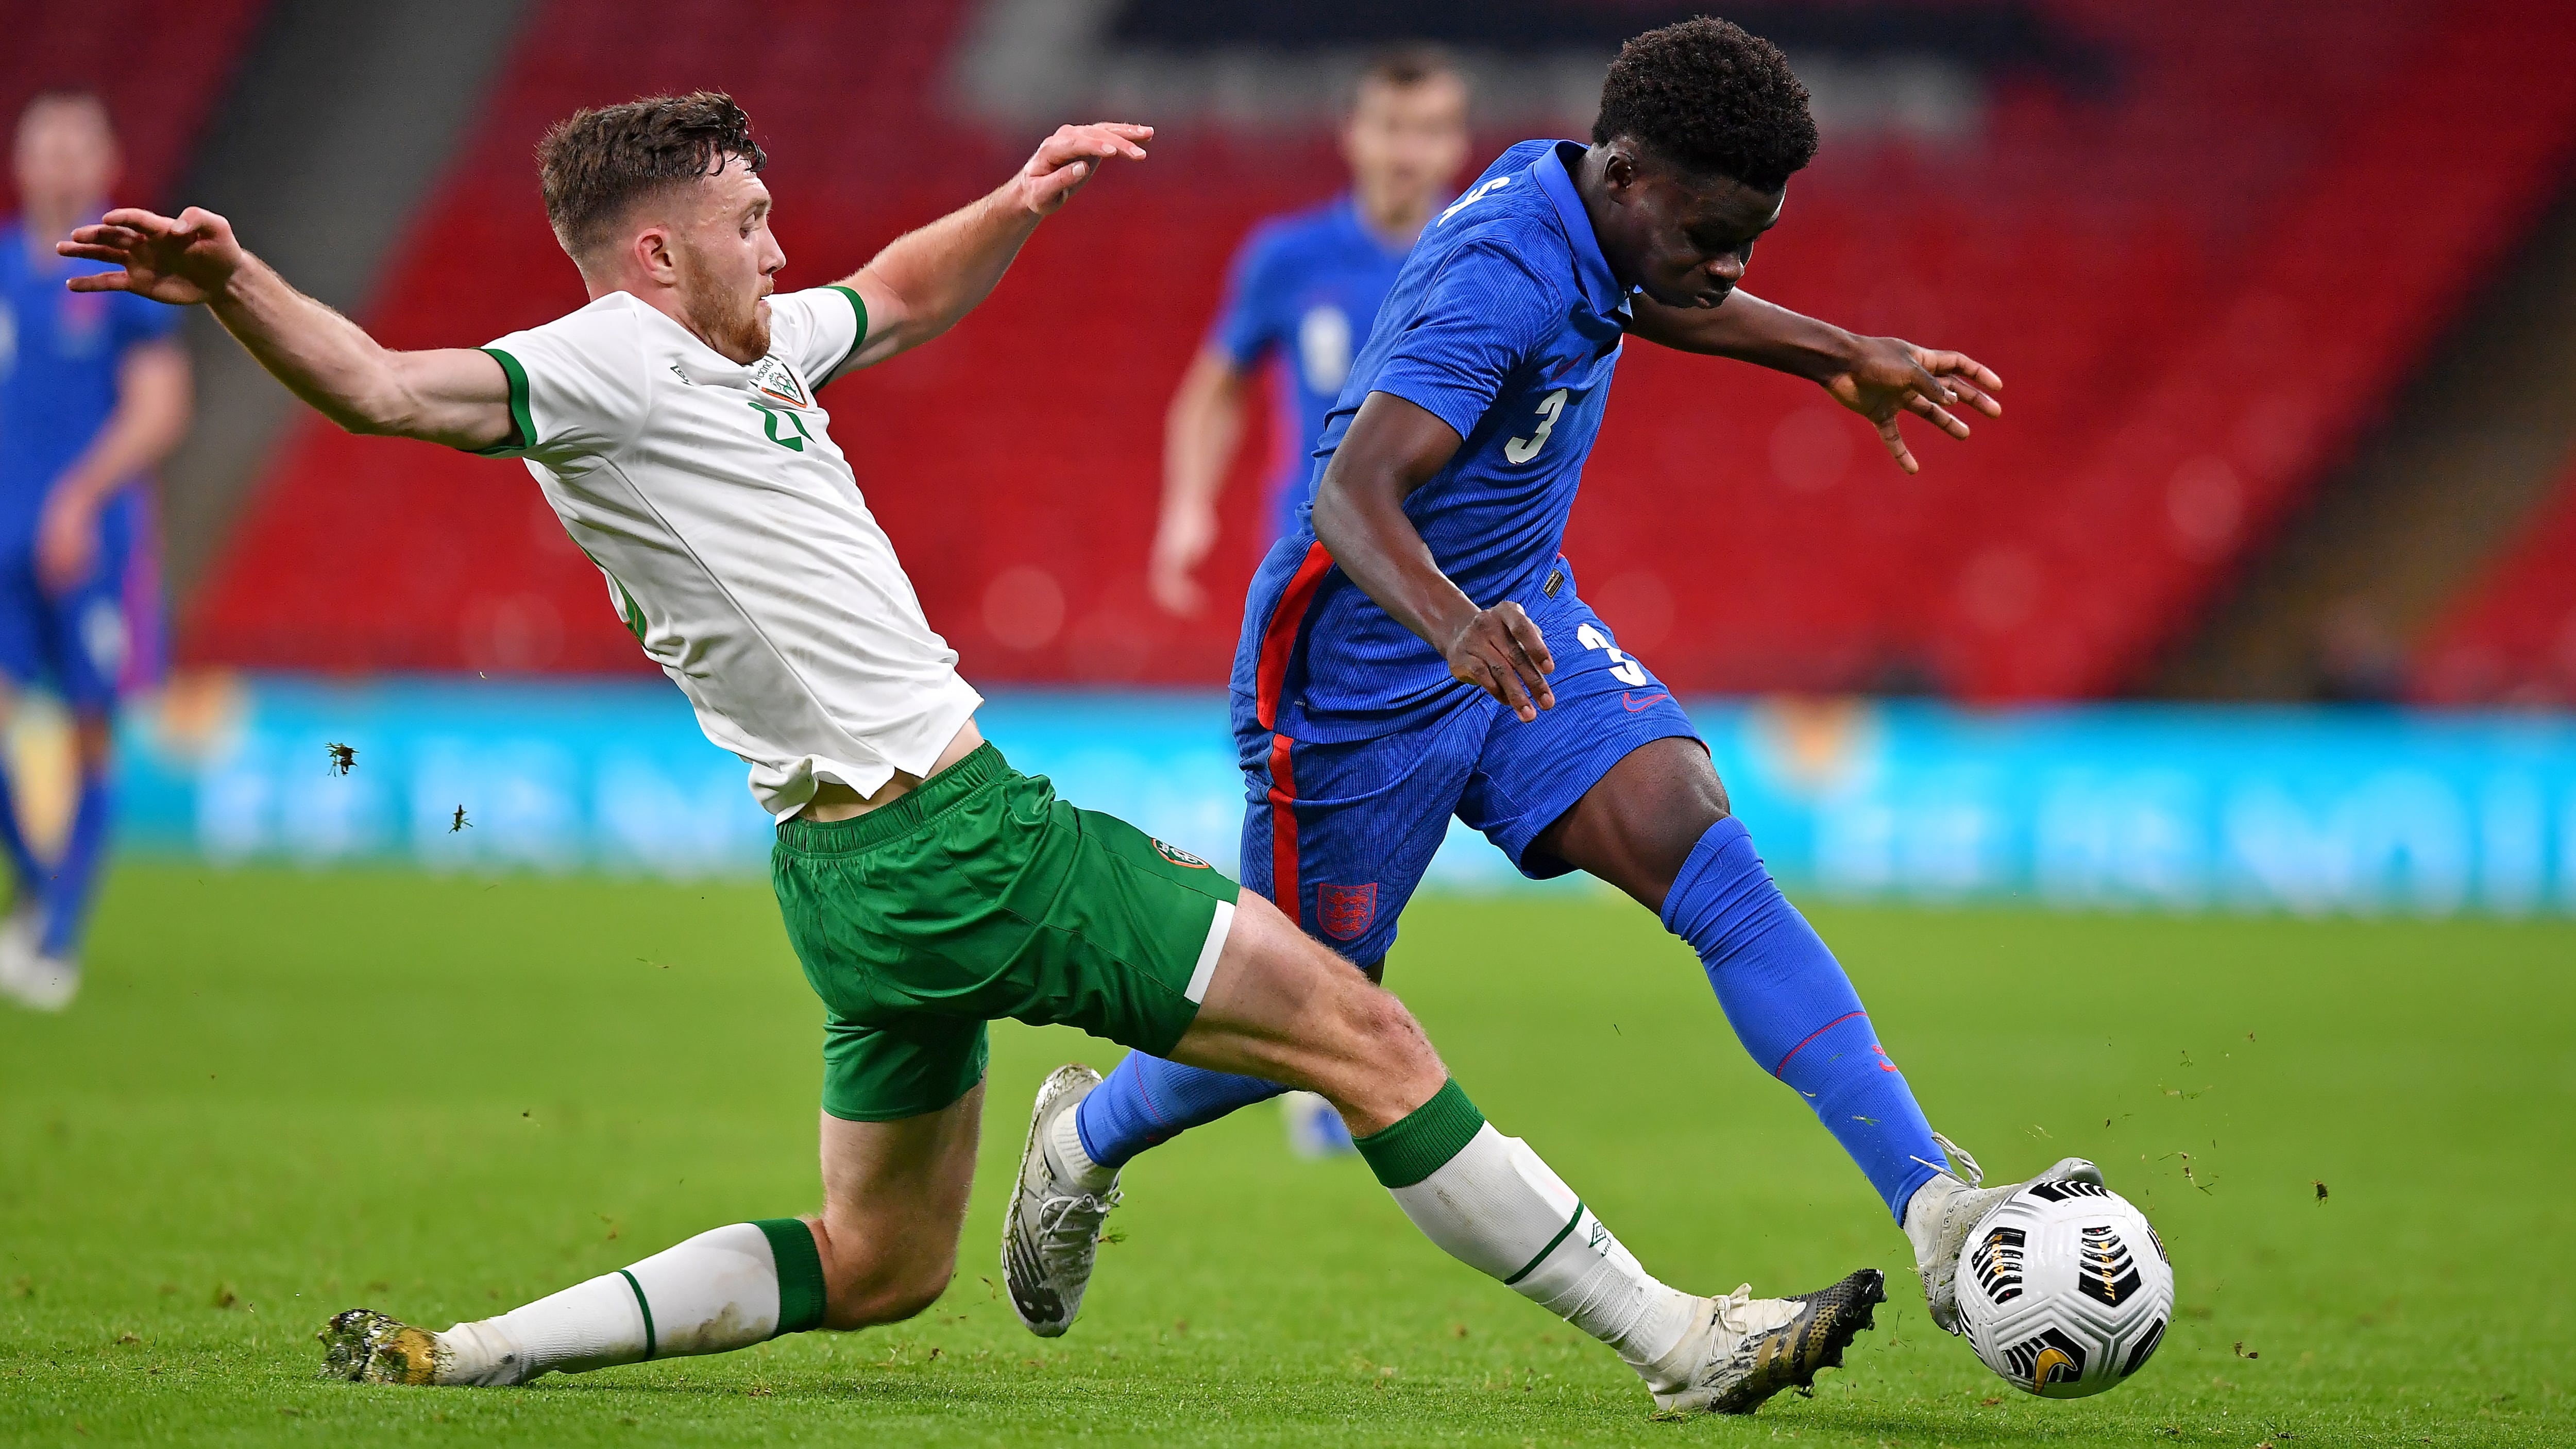 The Republic of Ireland and England face each other in their Nations League opener